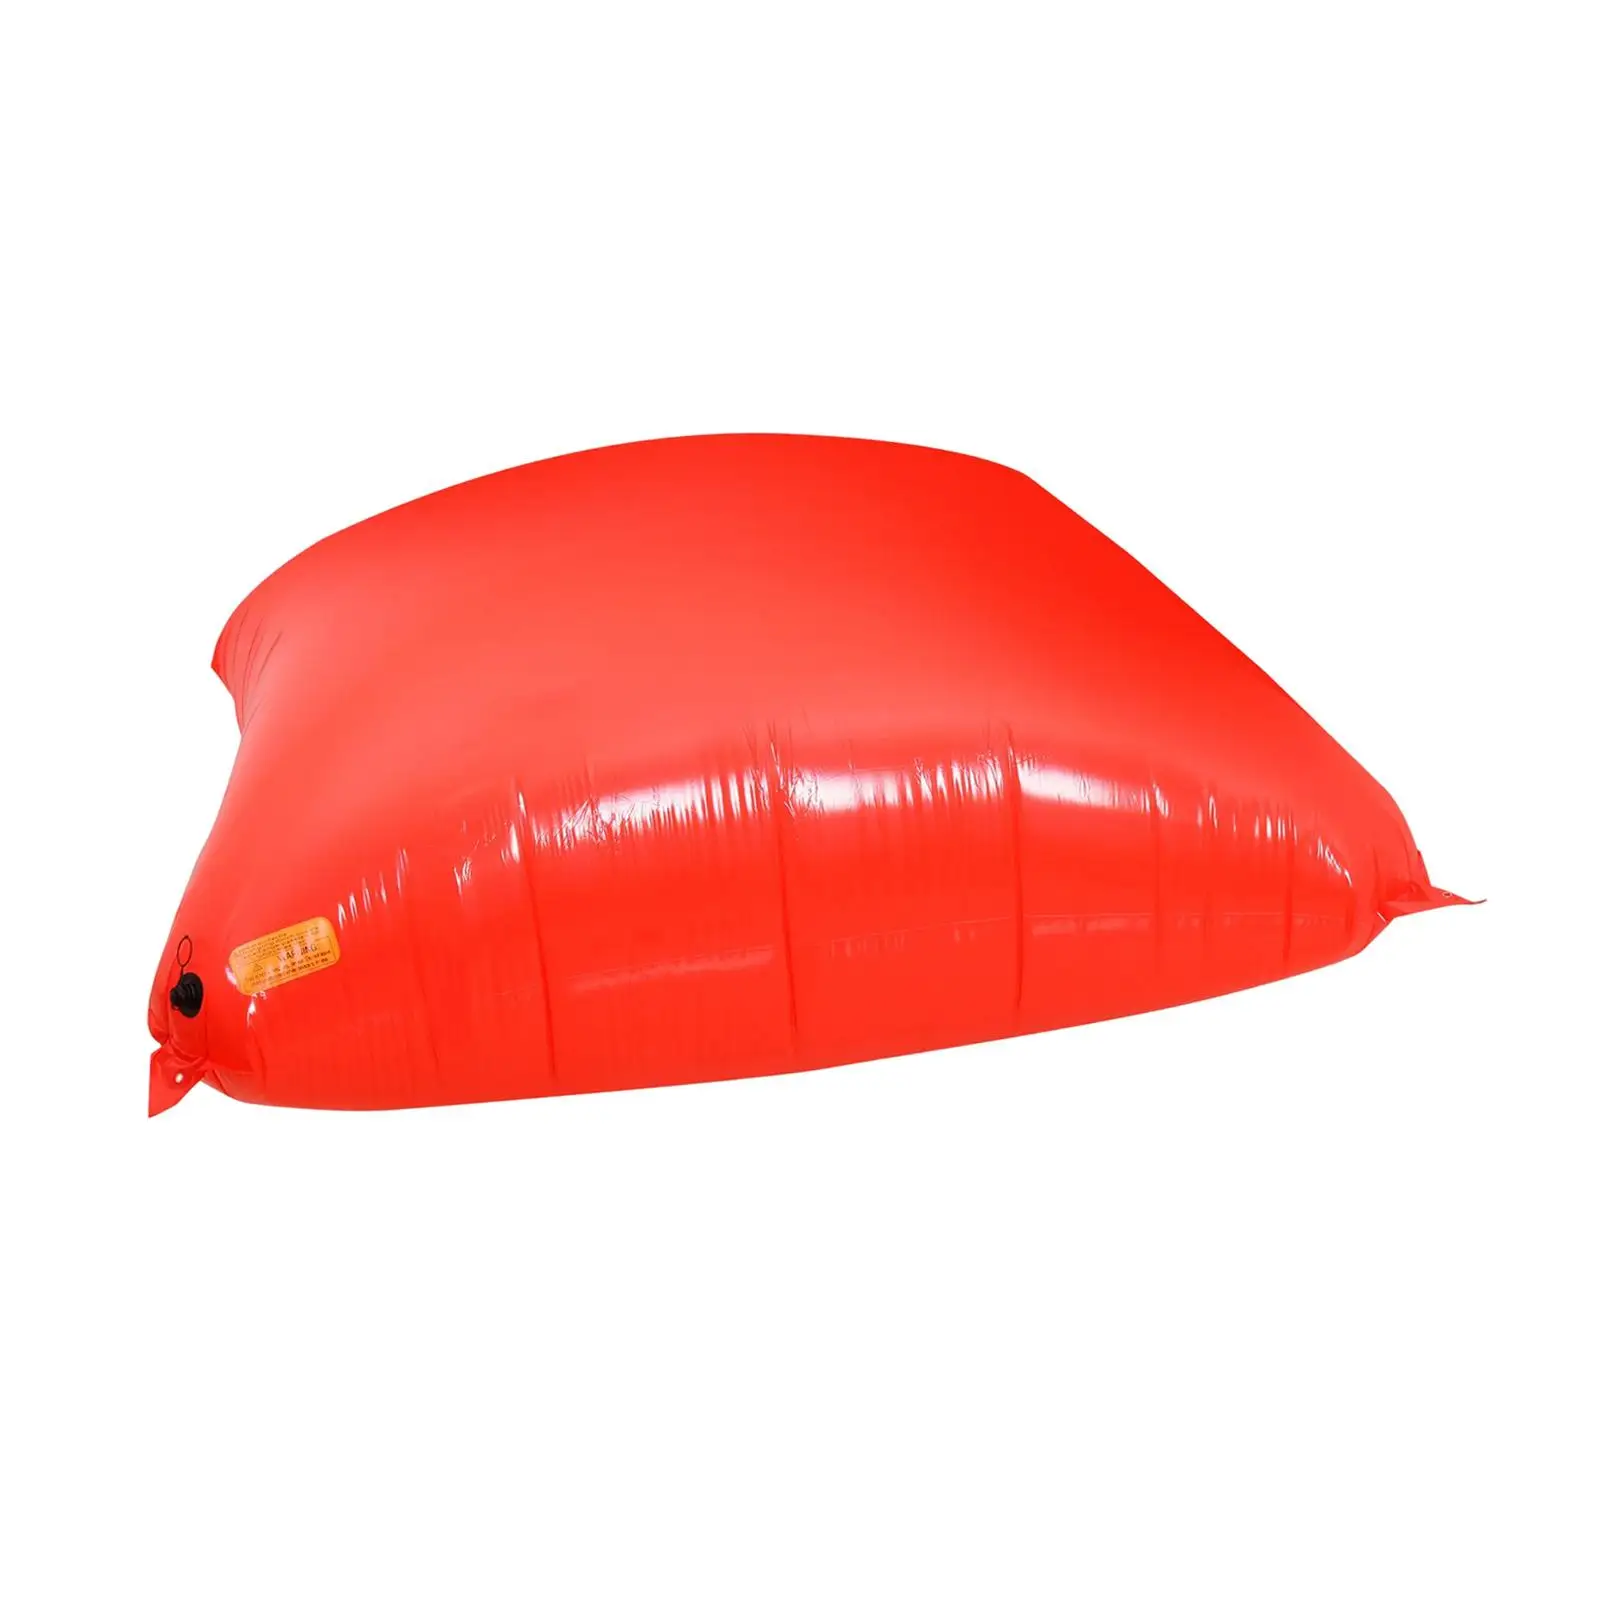 Inflatable Pool Floating Cushion Float Pillow for above Ground Pool